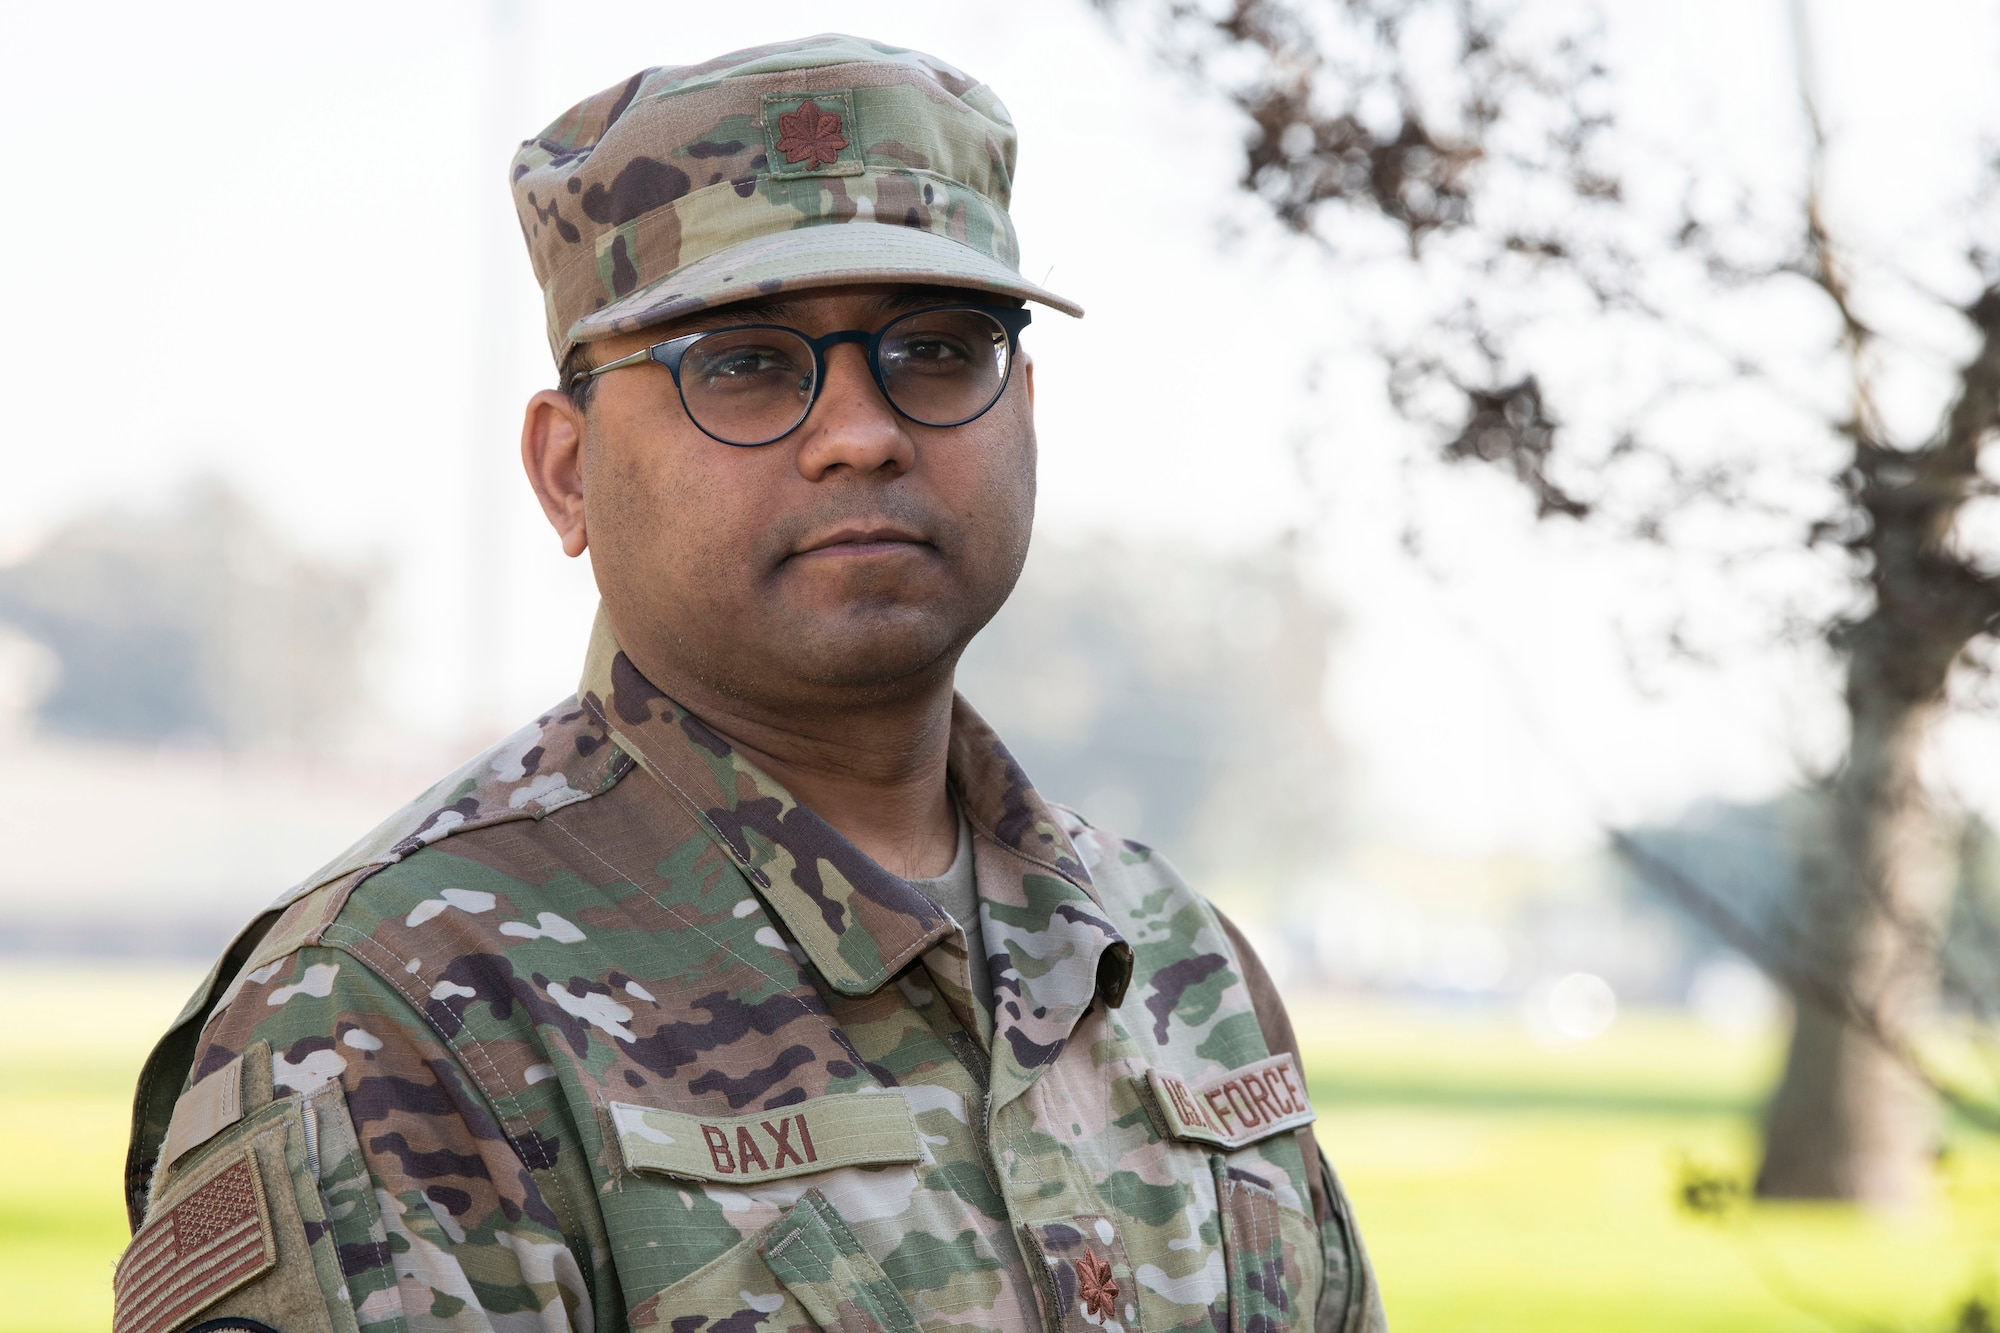 Maj. (Dr.) Sanjiv Baxi, a physician with the 349th Medical Squadron at Travis Air Force Base, California, poses for a photo prior to departing on a mission supporting COVID-19 relief in New York, Feb. 4, 2022 (U.S. Air Force photo by Grant Okubo)